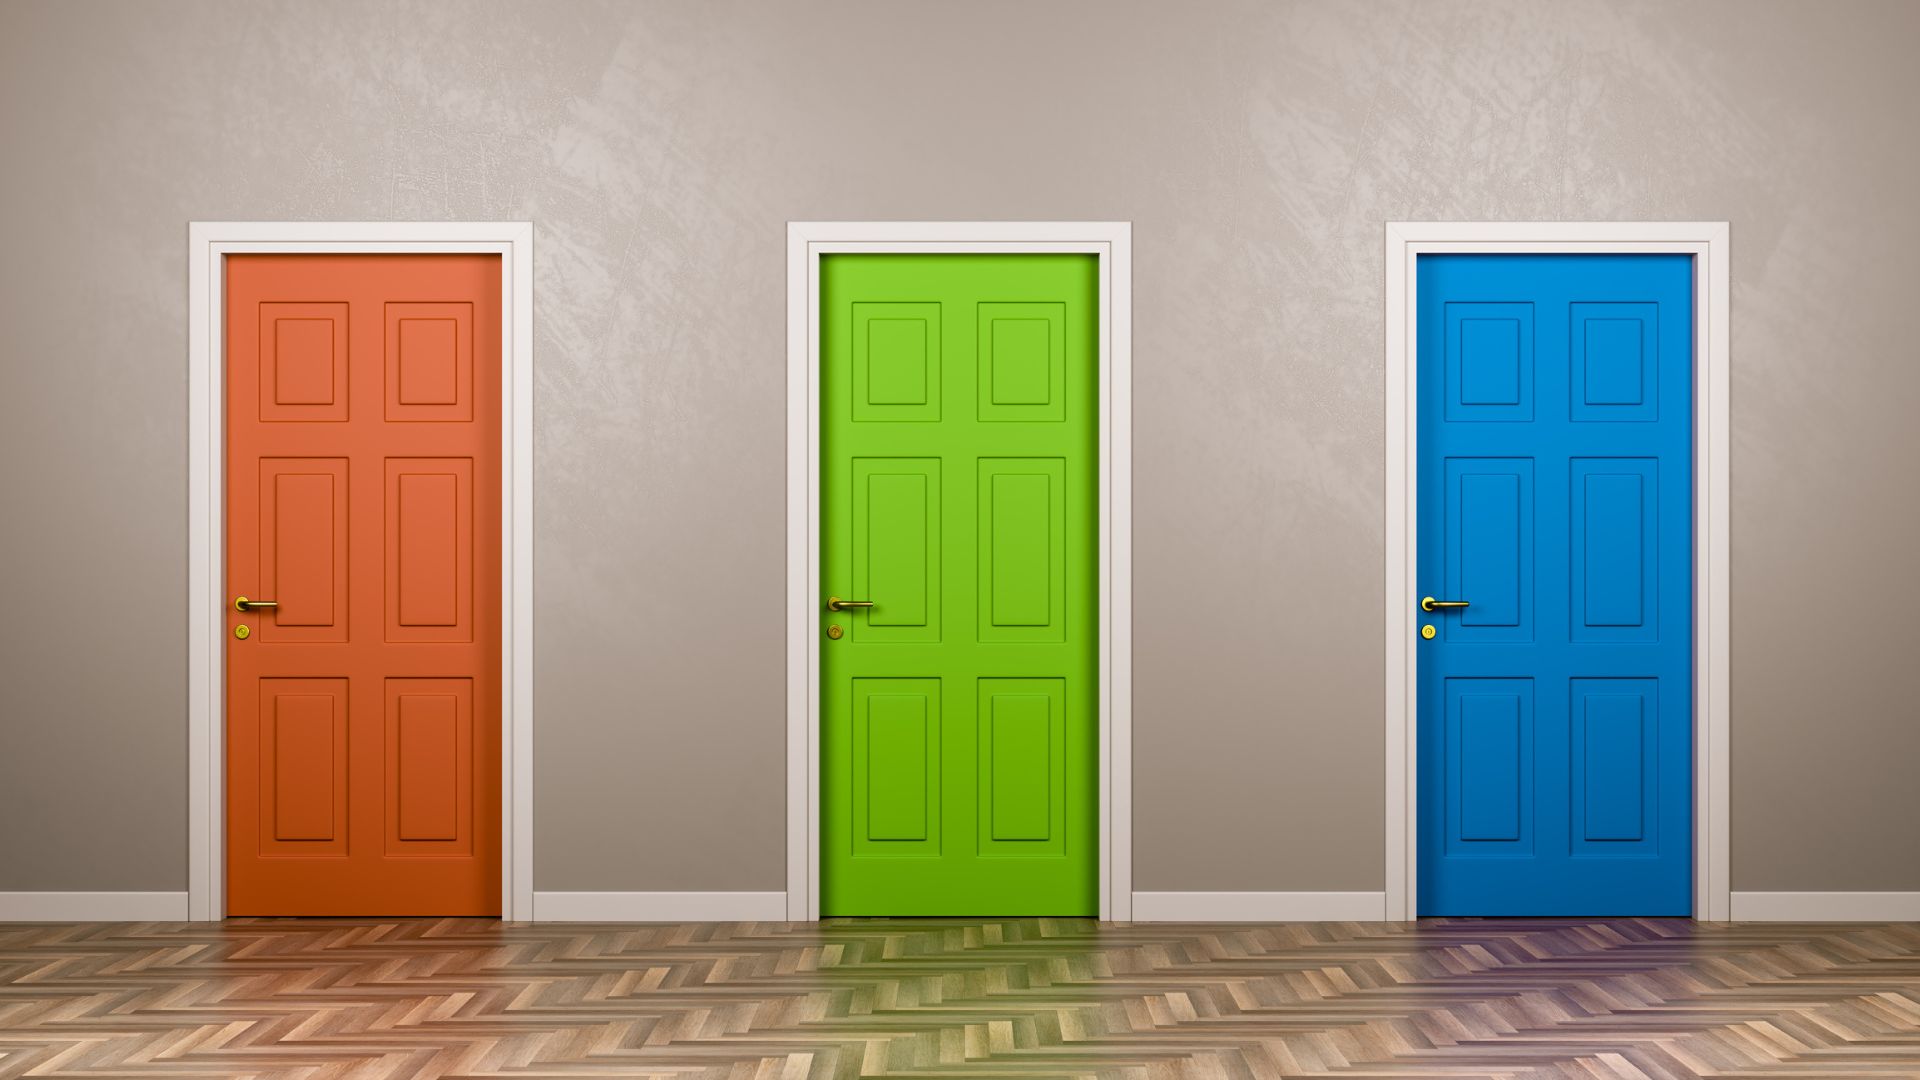 Three doors: red, blue, and green, standing in a room.